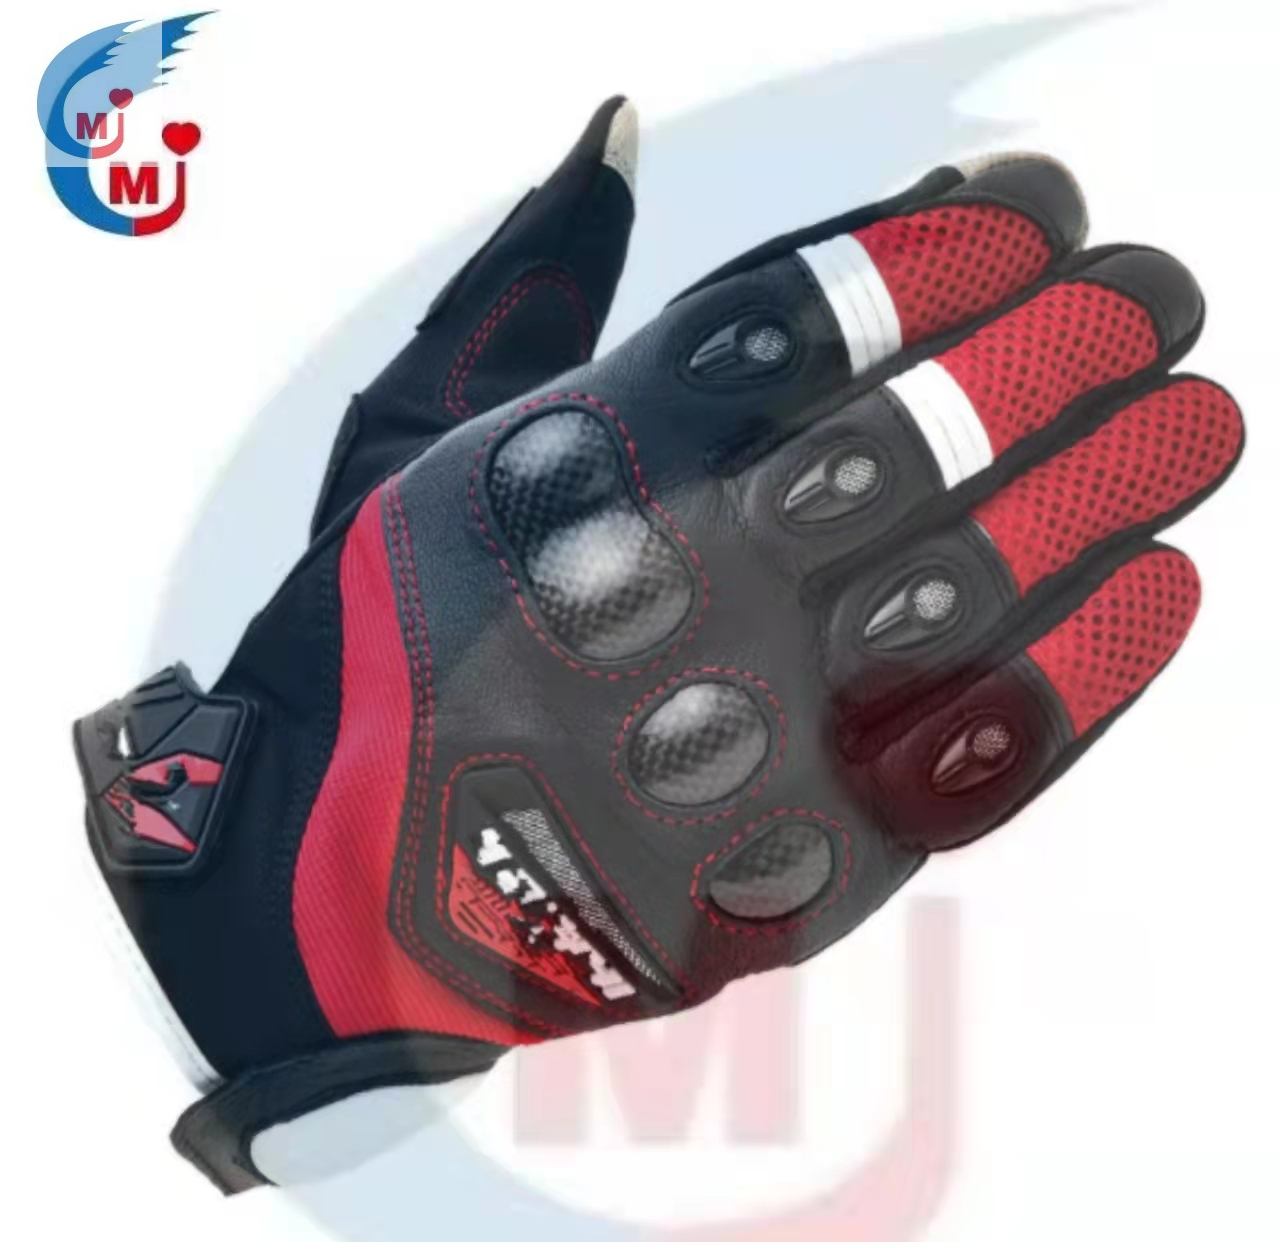 Motorcycle Racing Locomotive Riding Rider Equipment Gloves Protective Non-slip Anti-fall Touch Screen Gloves